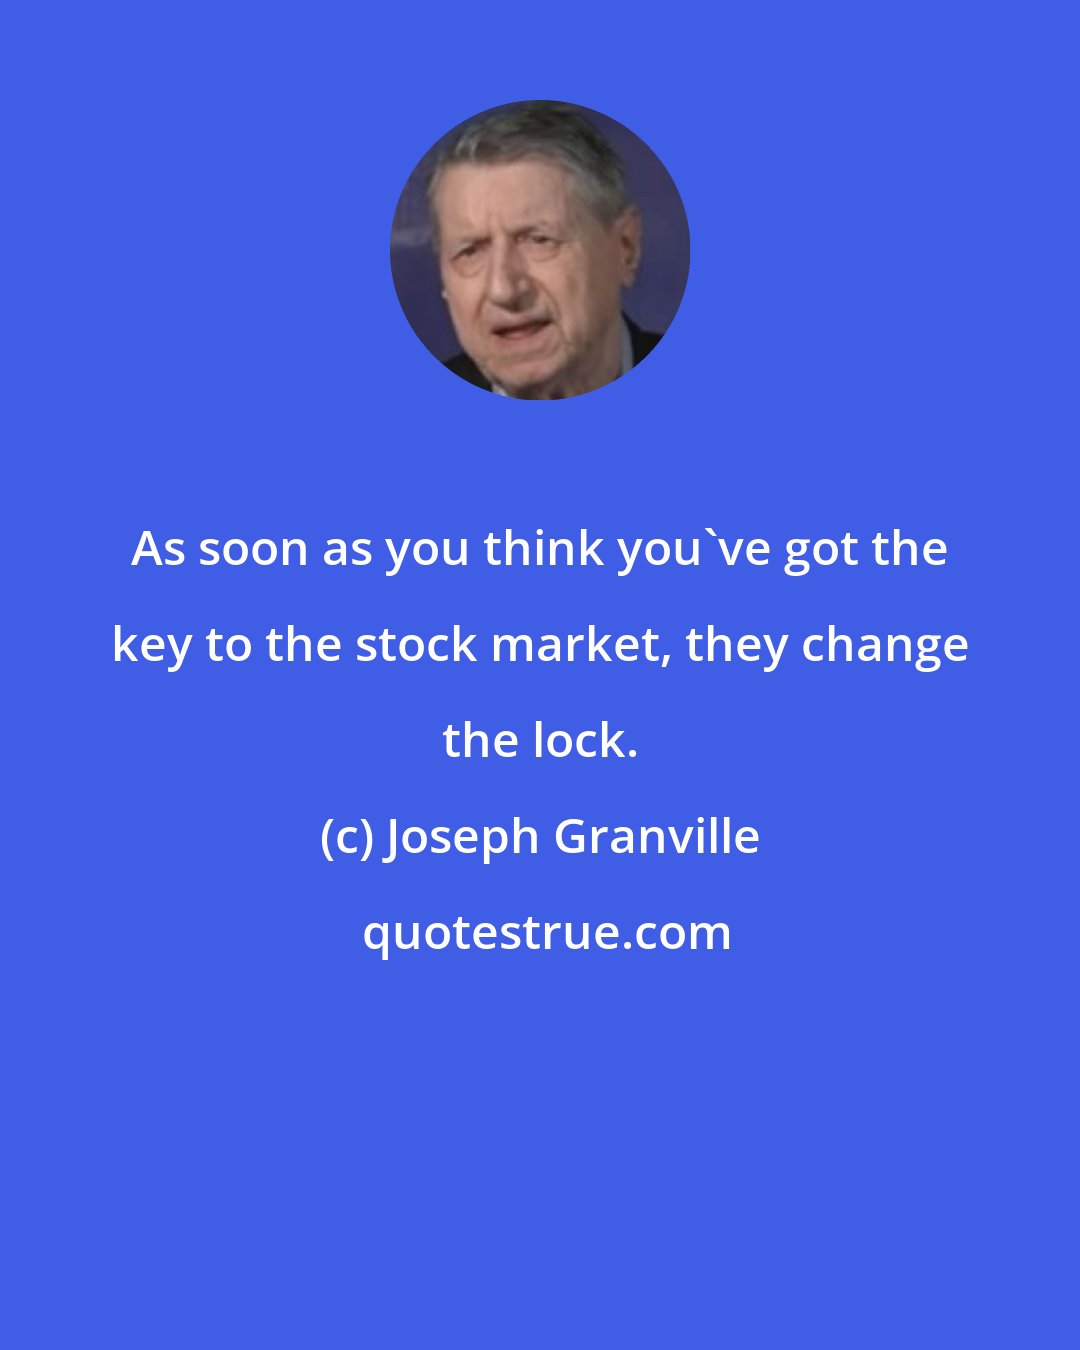 Joseph Granville: As soon as you think you've got the key to the stock market, they change the lock.